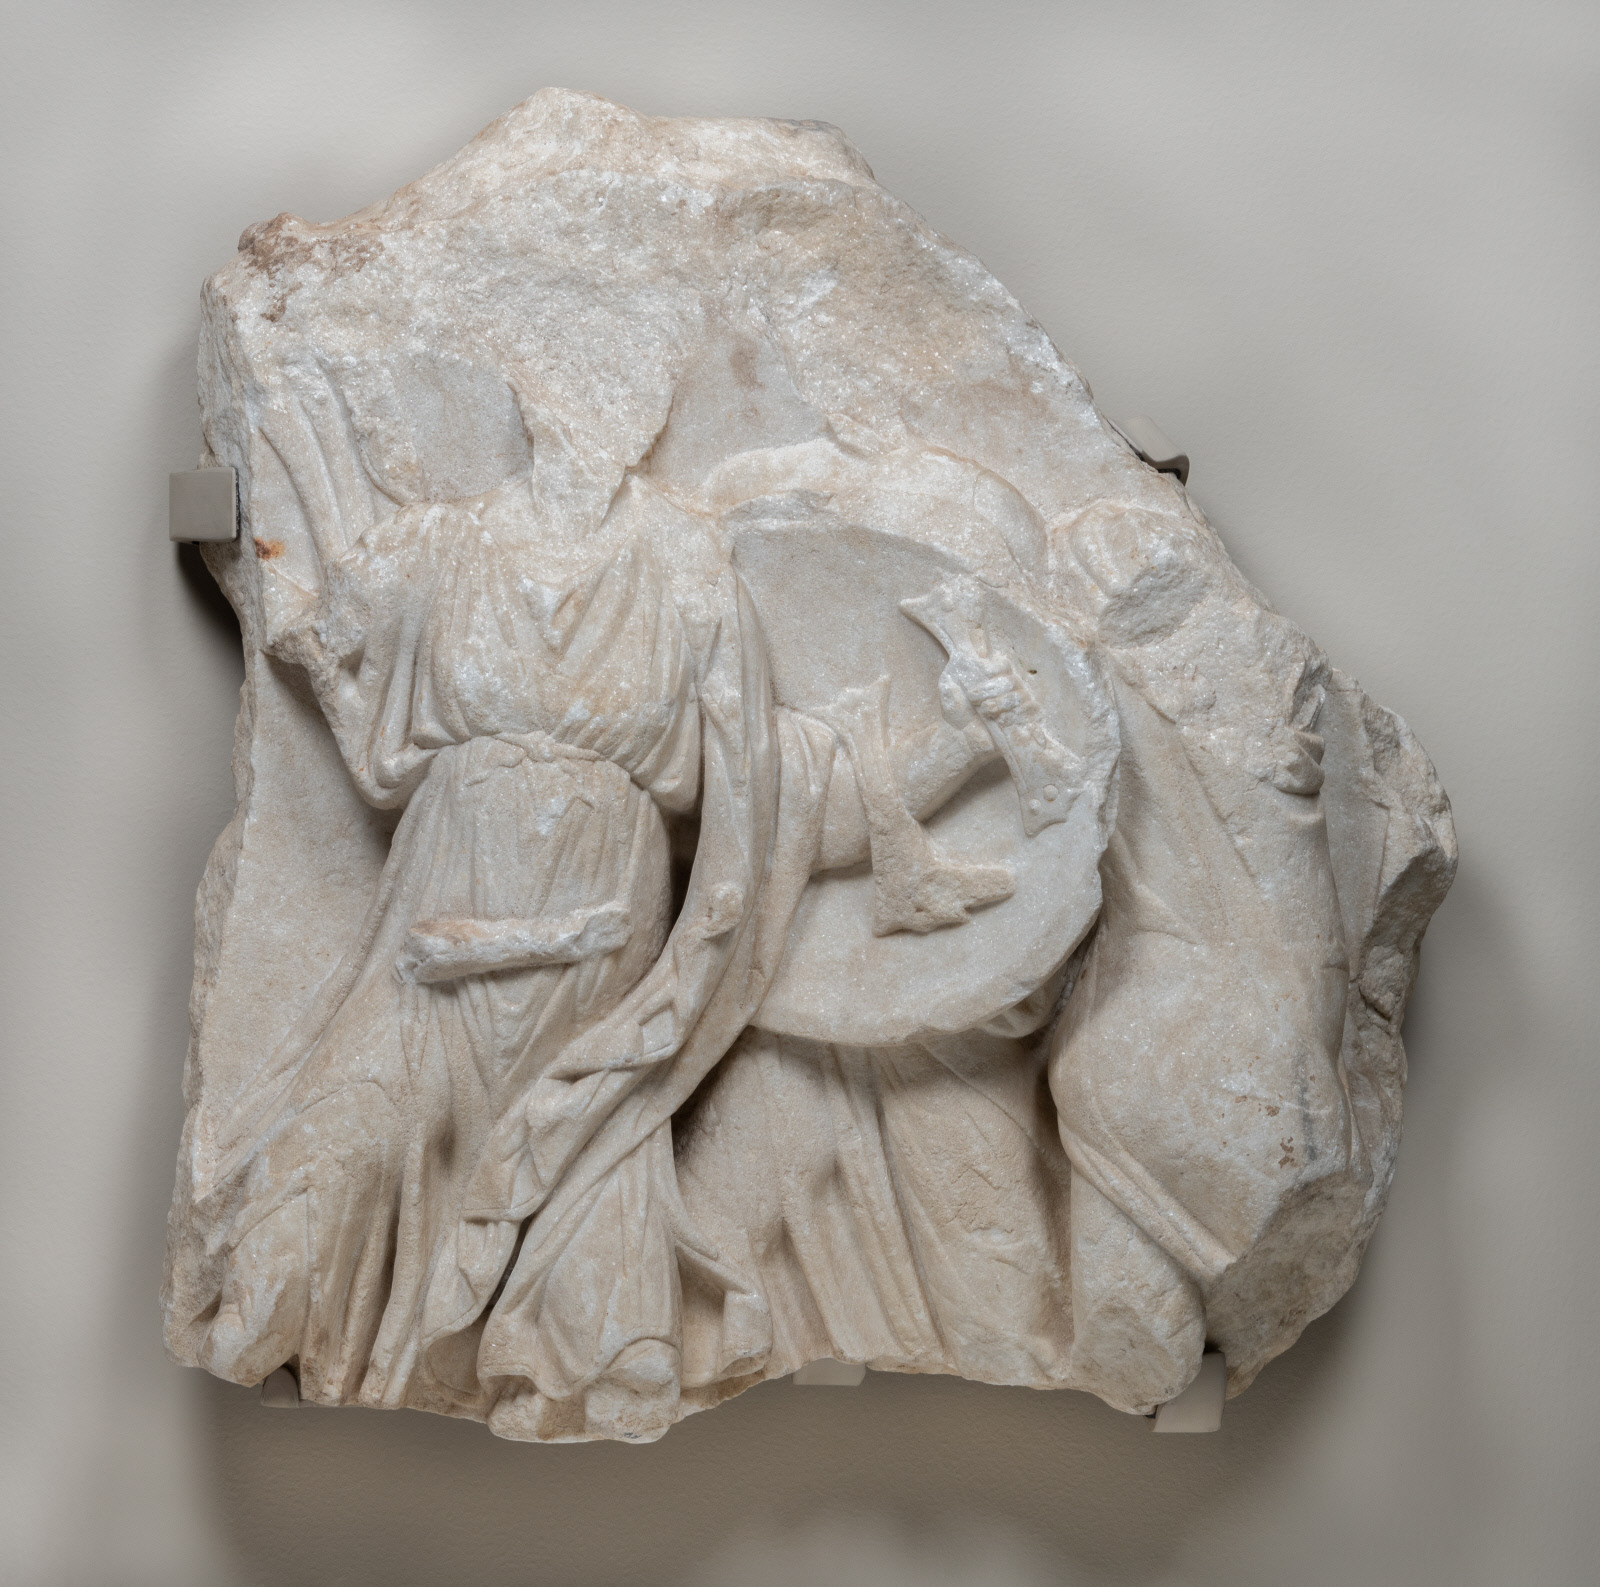 Sarcophagus fragment with Achilles on Skyros